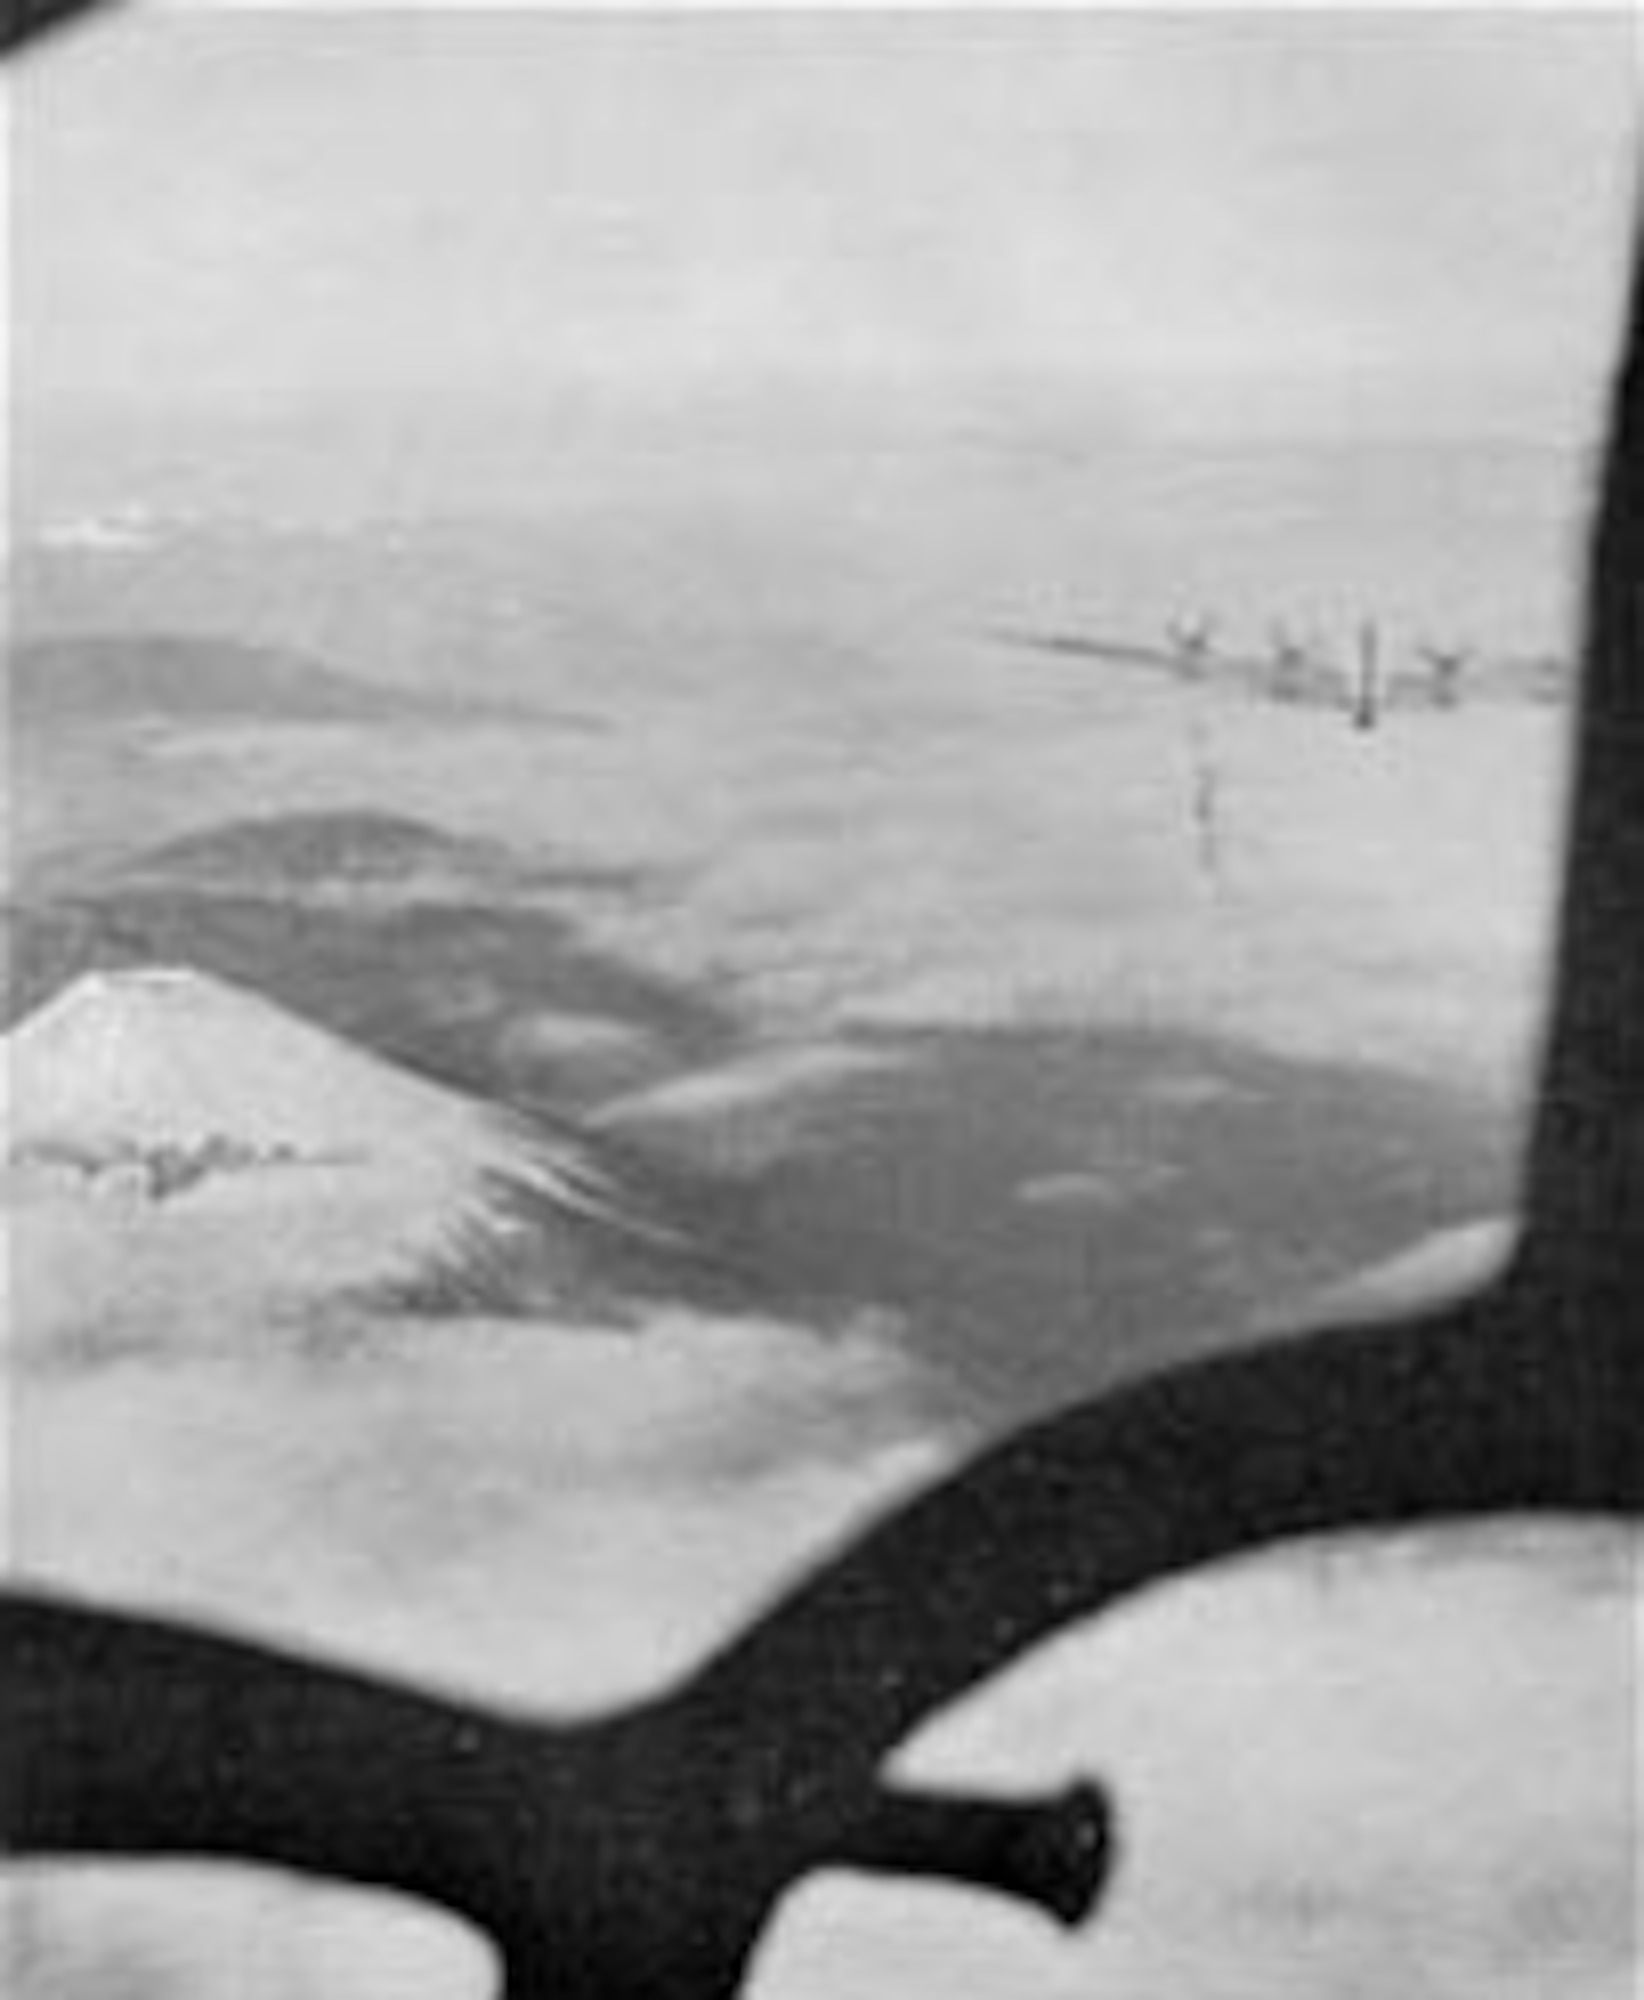 Mt. Fuji as seen through the nose of a B-29 over Japan on the first mission against Tokyo since the visit of General Doolittle's medium bombers in April 1942. Bombs were released over the primary target, the Musashino aircraft plant, on Nov. 24, 1944. (U.S. Air Force photo)